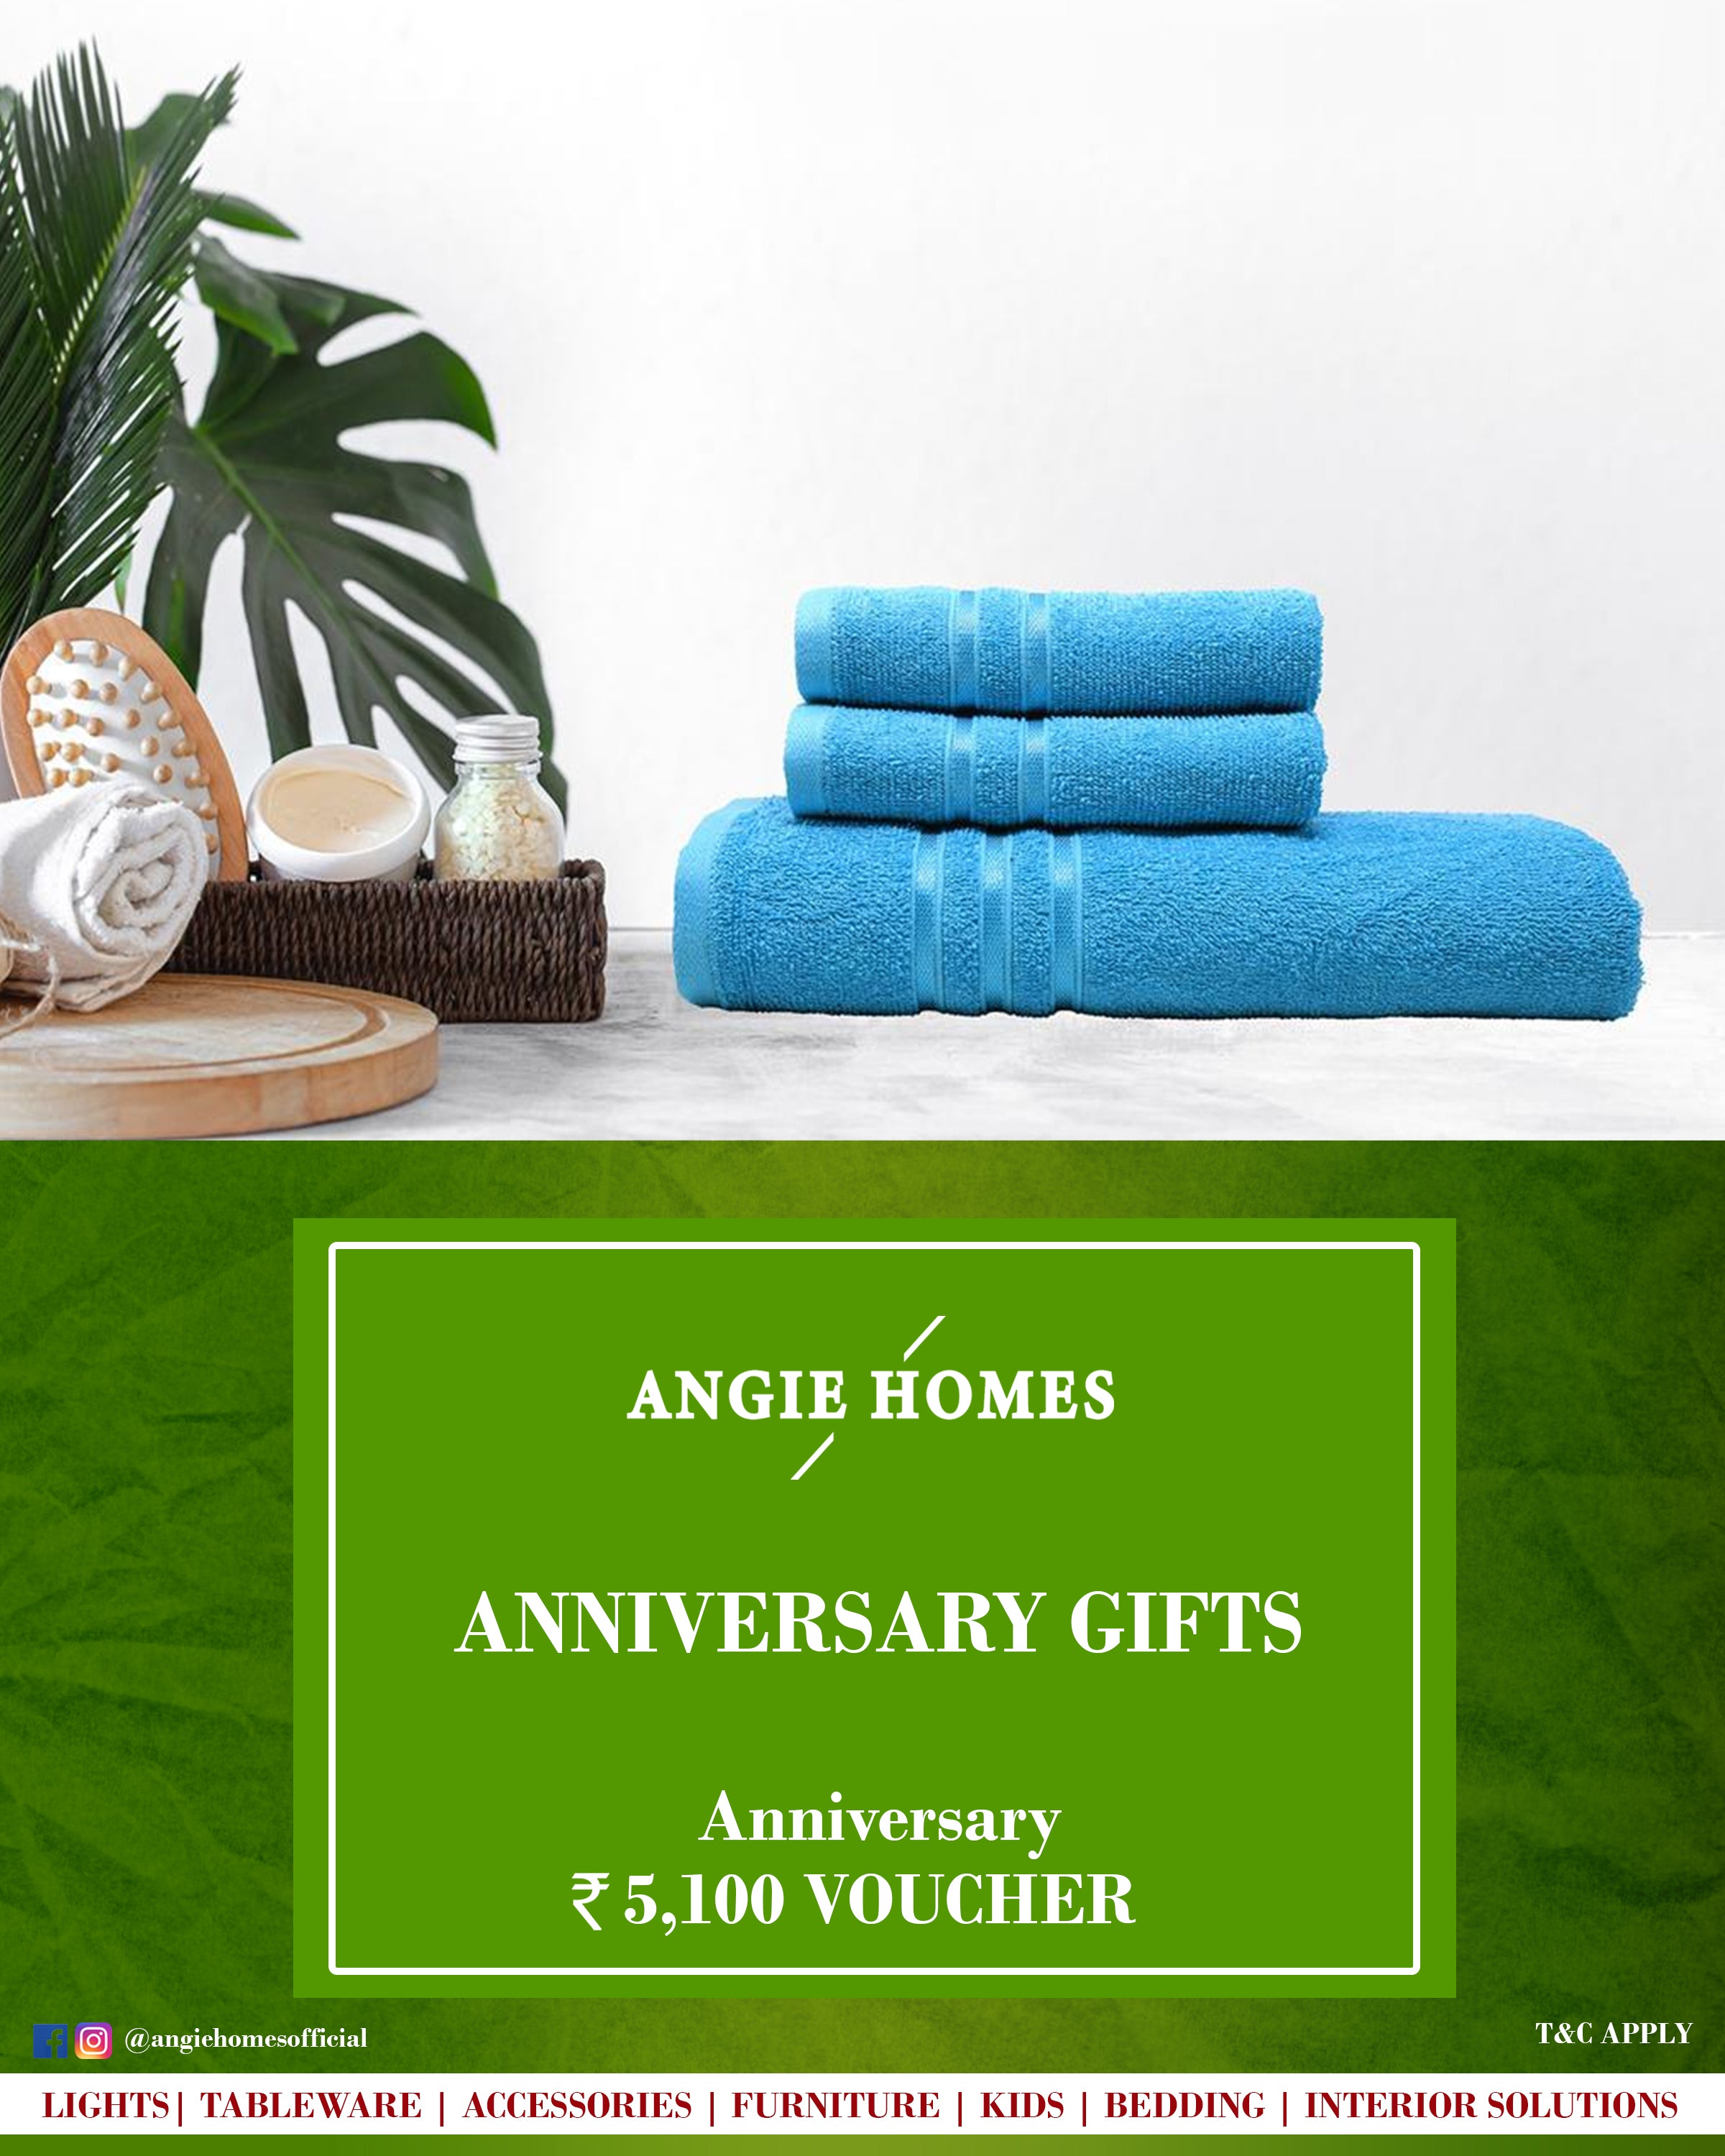 Anniversary Gift Vouchers Online for Towel - Angie Homes E-Gift Card